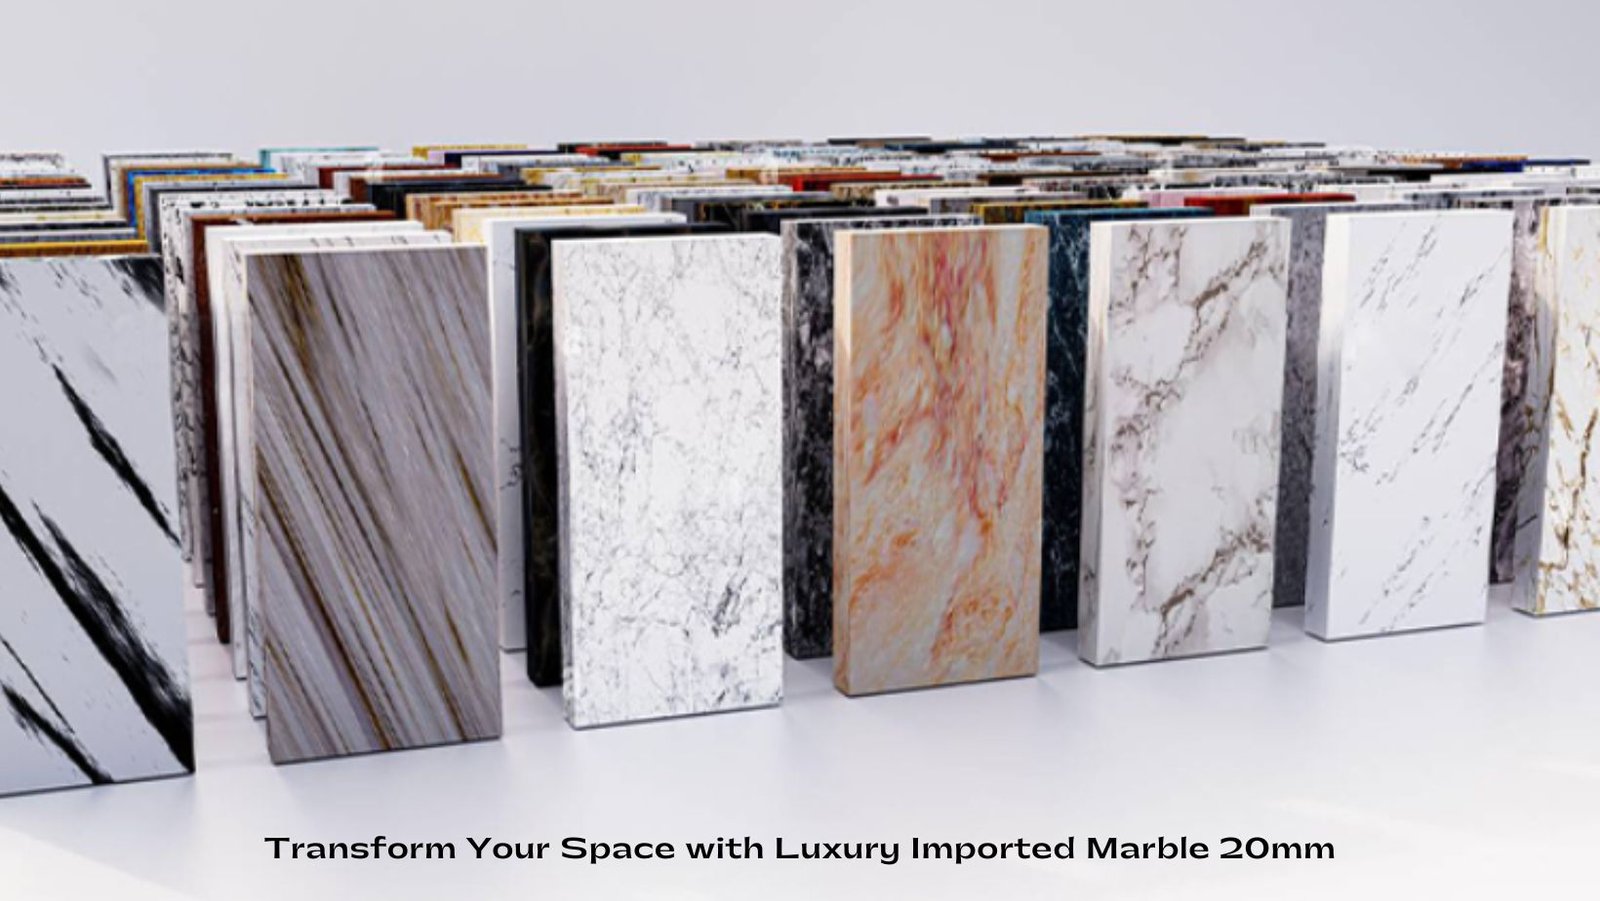 Luxury Imported Marble 20mm – Explore the World of White Marble